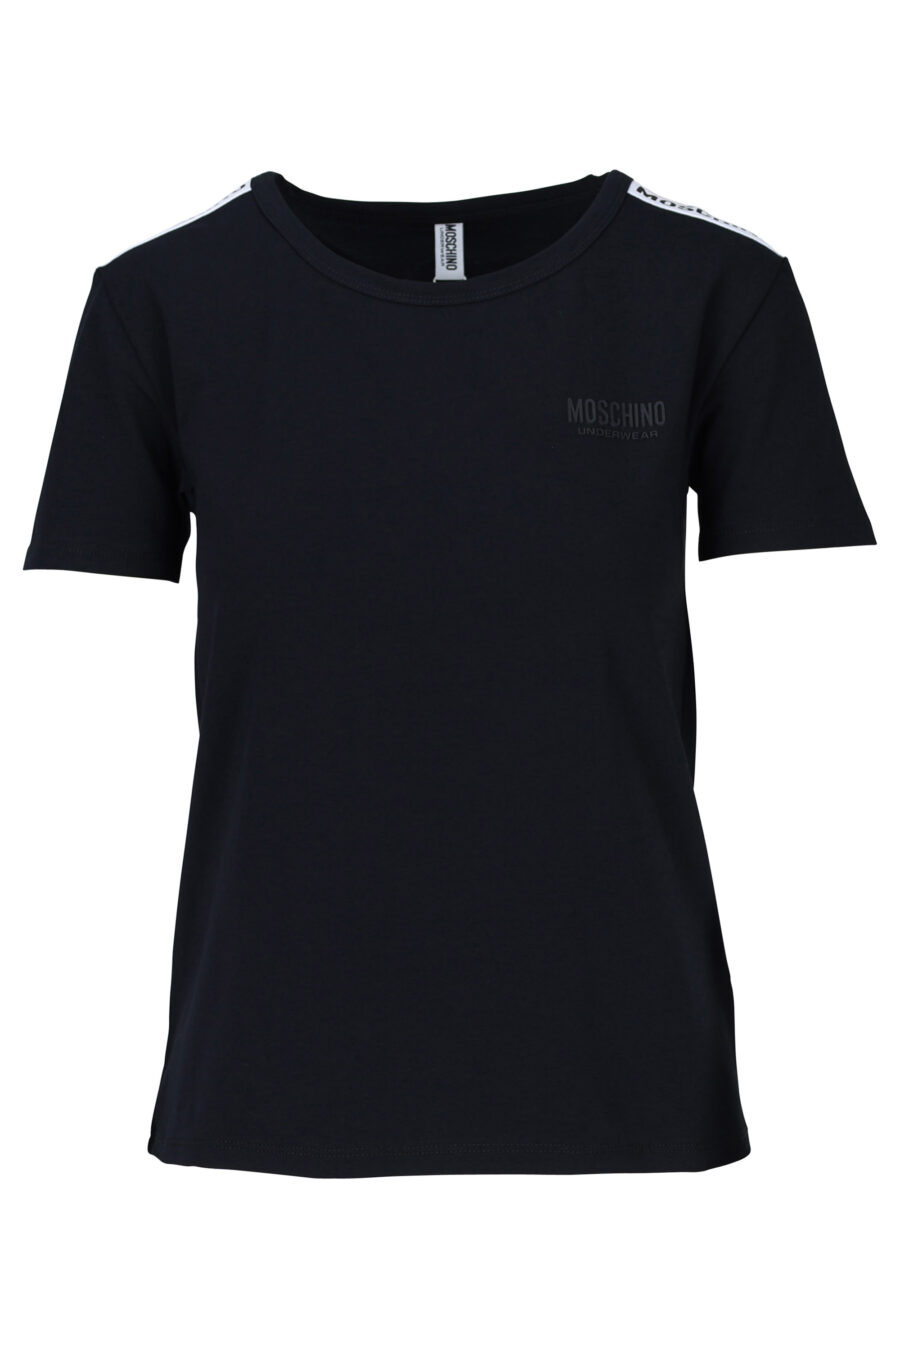 Black T-shirt with logo on shoulders - 667113033723